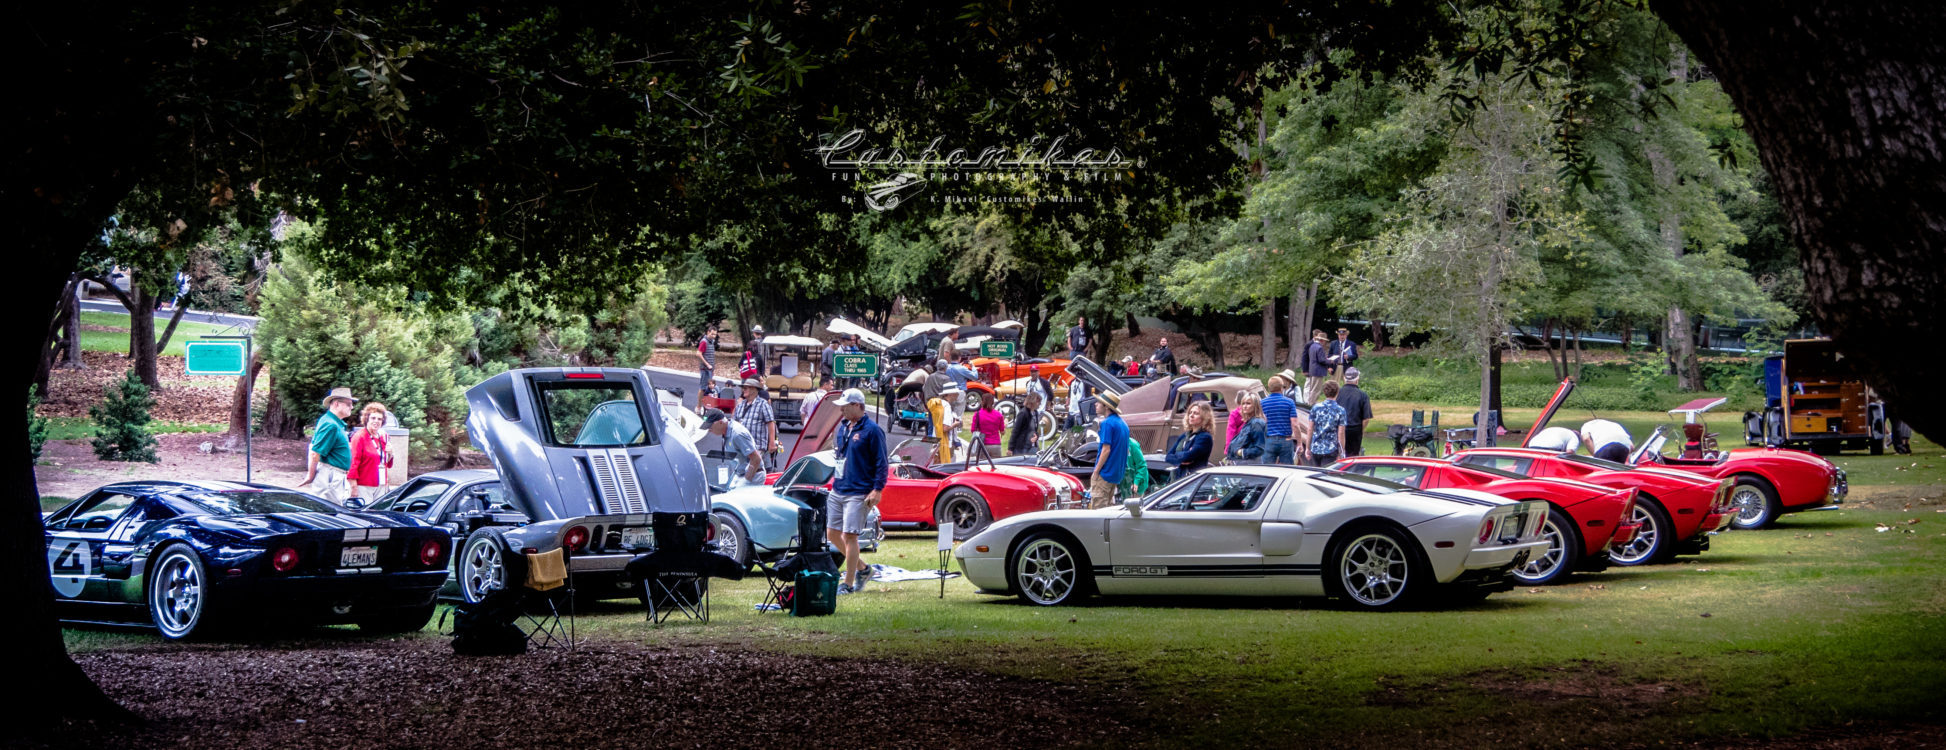 GT_40, ford, ac bristol, ac cobra, shelby, ford SVO, svo, outstanding, group of GT-40's, classic, SMMC, Lacy Park, San Marino Motor Classic